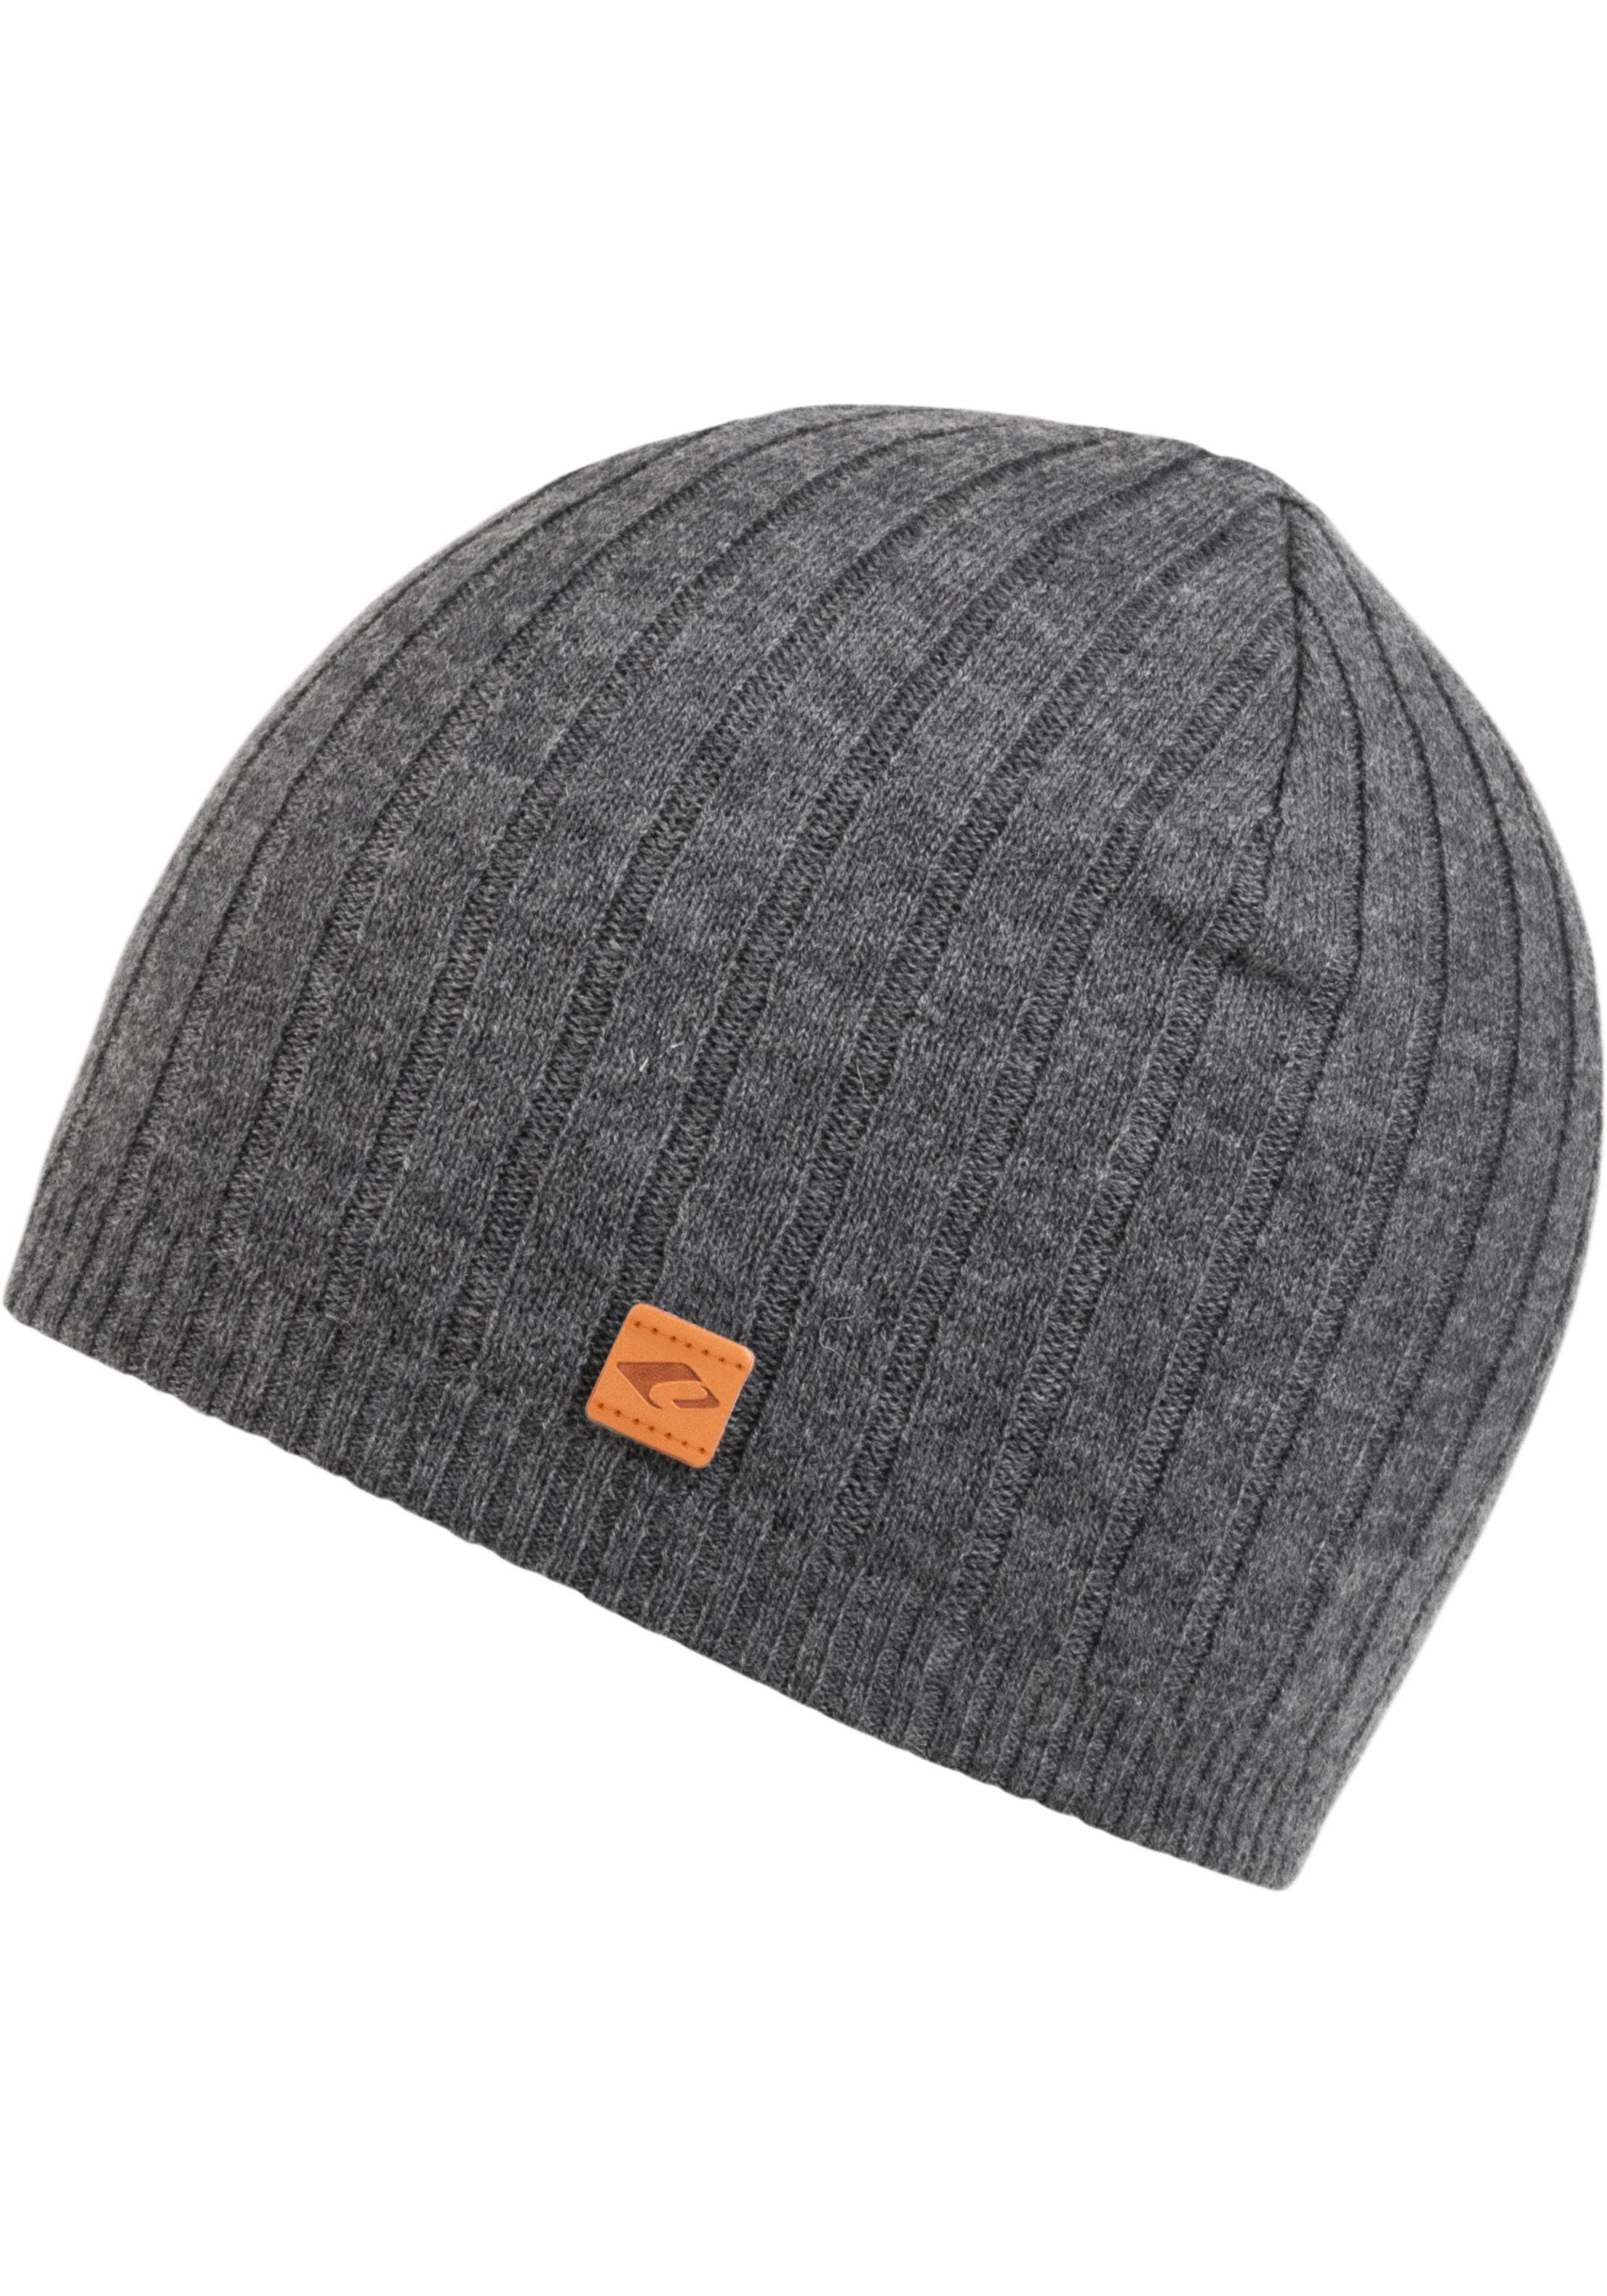 chillouts grey angenehm Alfred warm melange Doppellagig, Hat Beanie